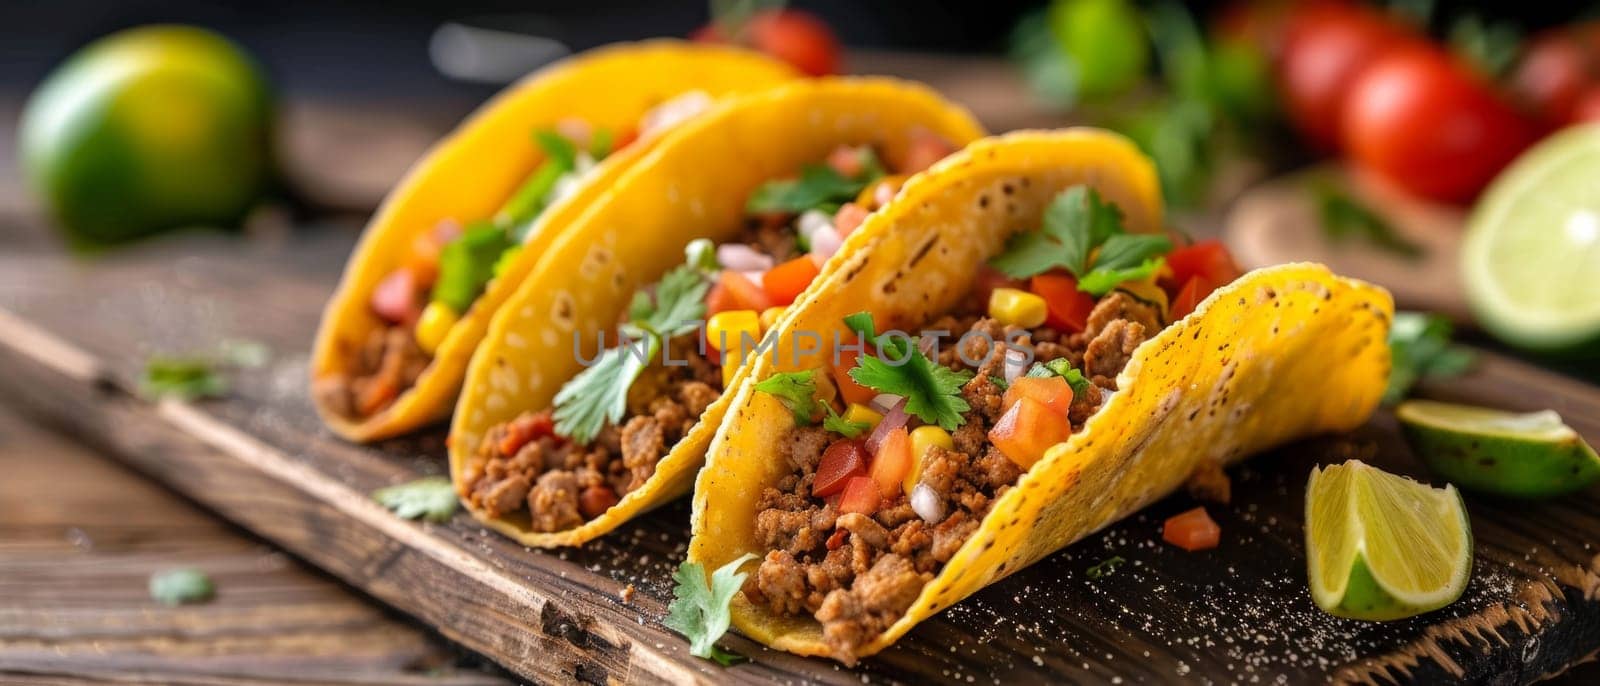 A row of crunchy ground beef tacos garnished with fresh parsley, lime wedges, and a dusting of spices on a wooden board